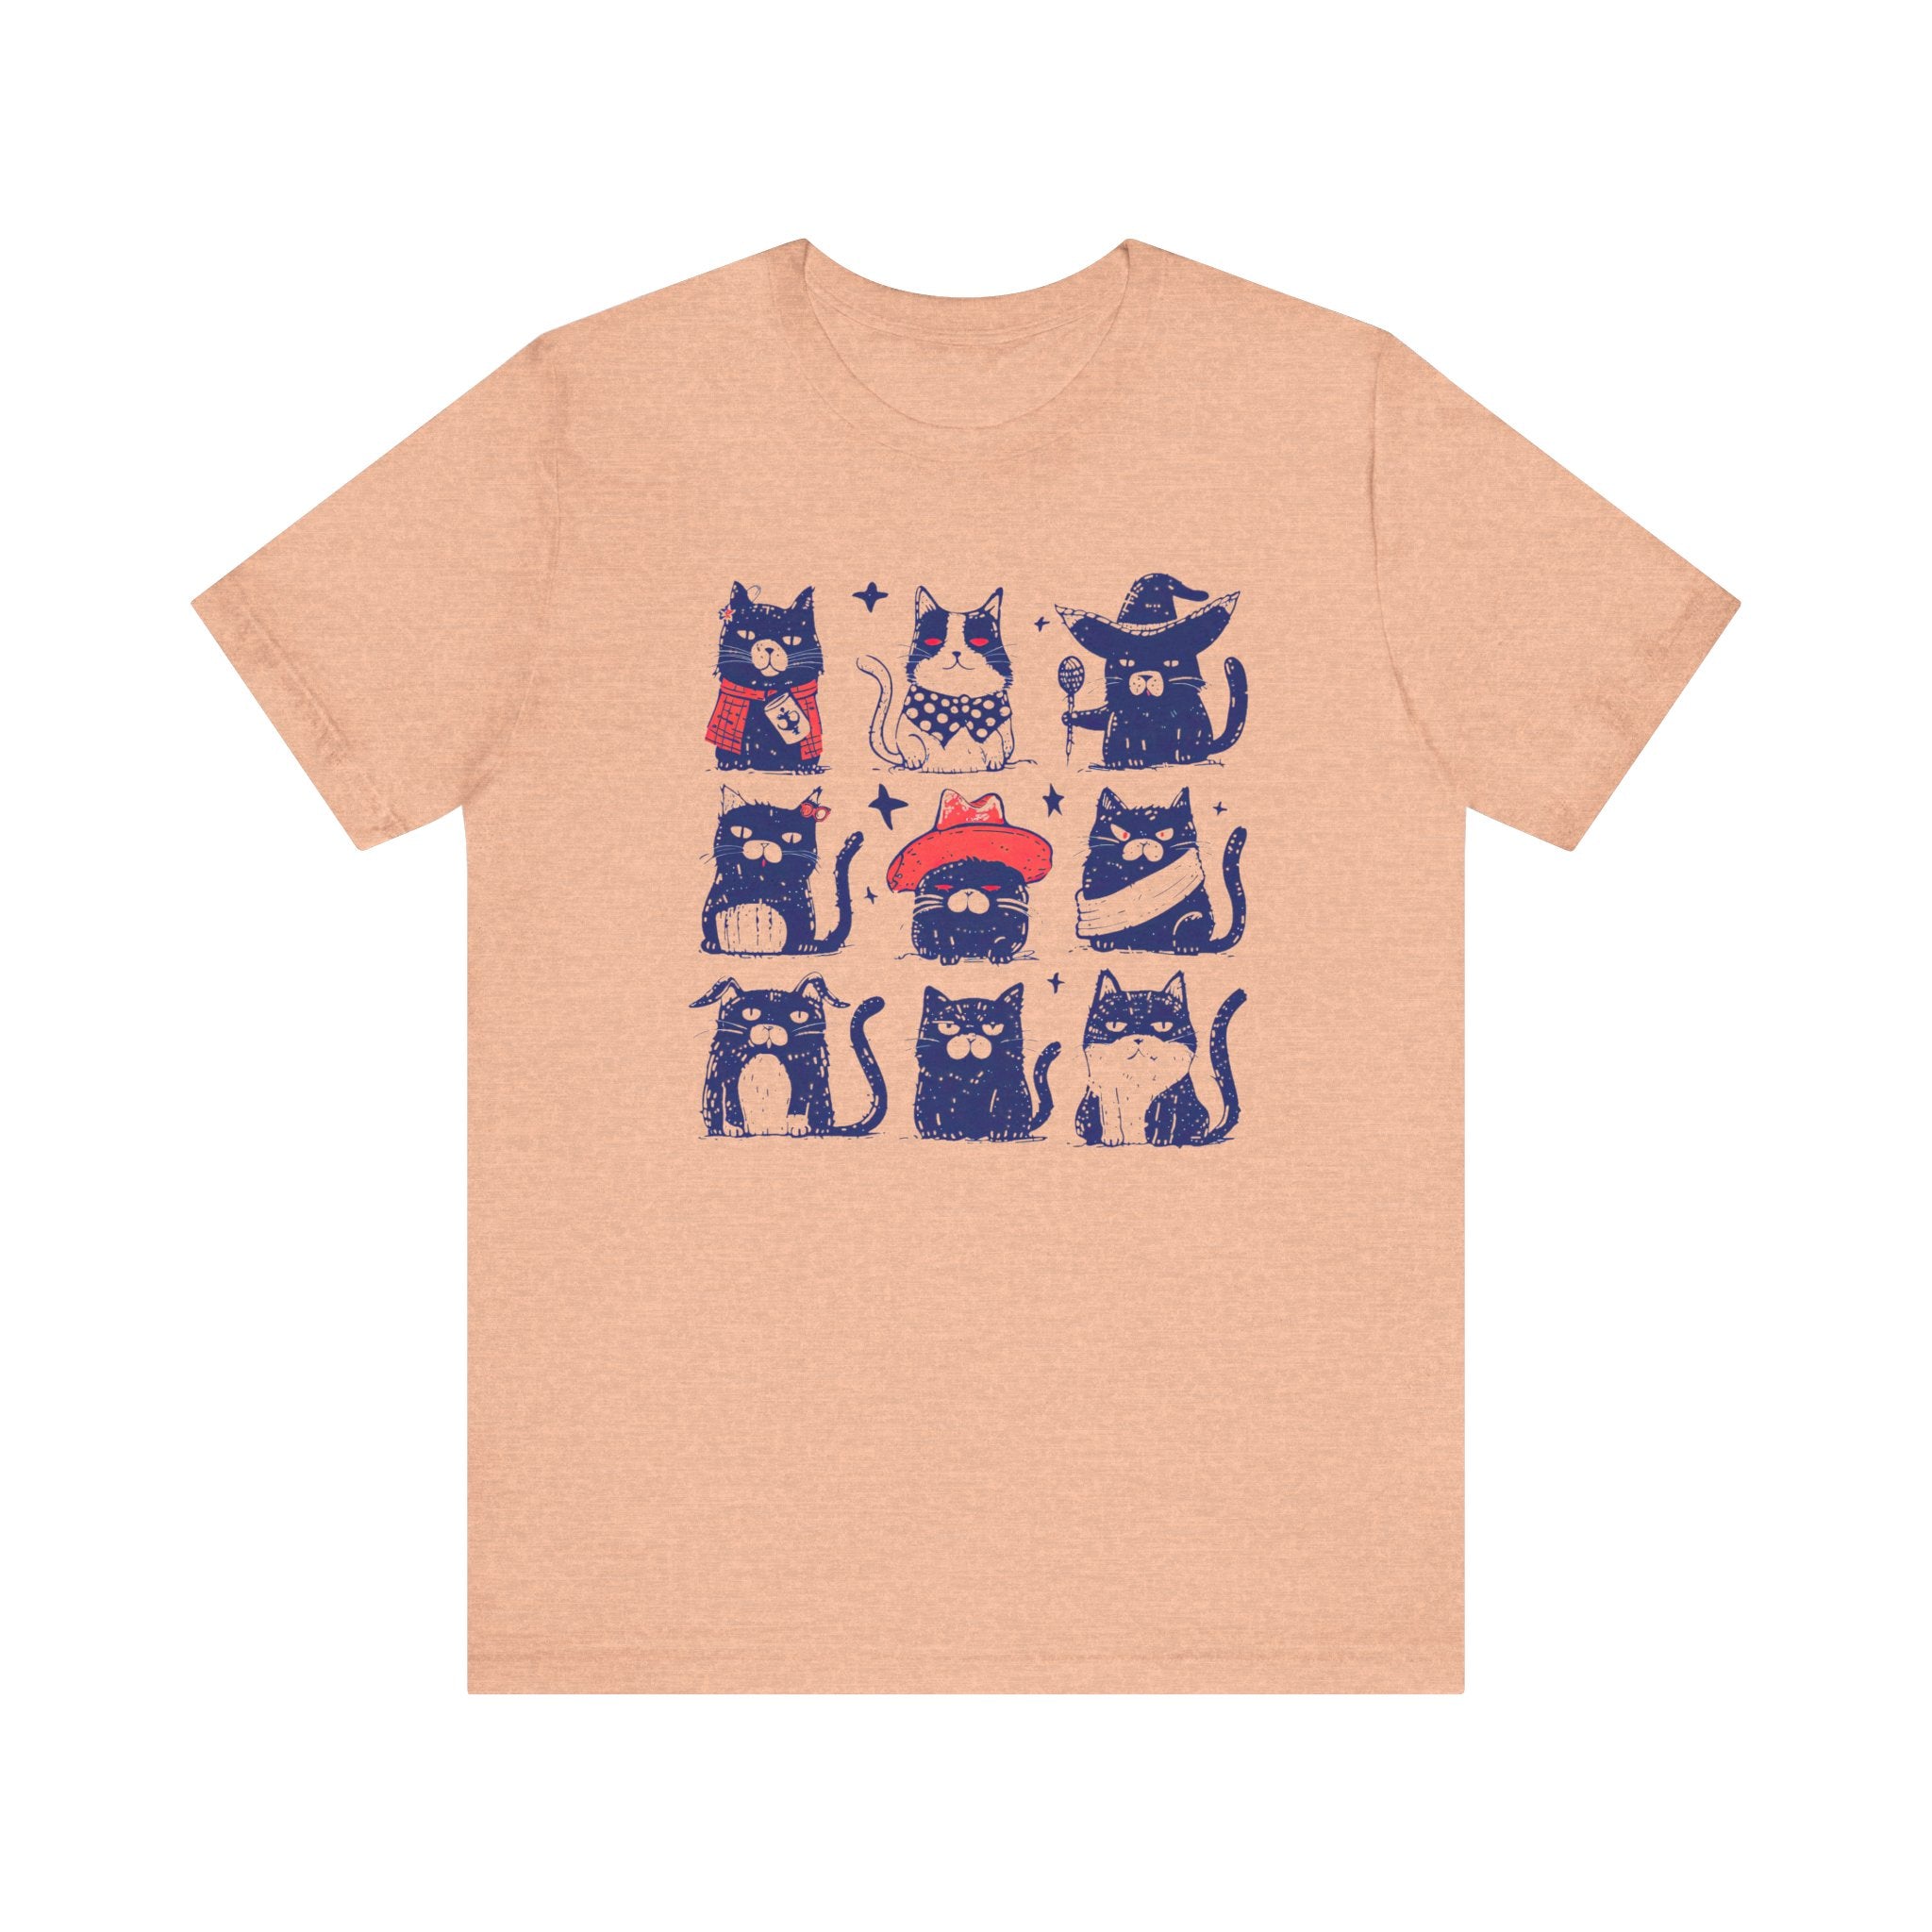 Cute Cats in Costumes T-Shirt